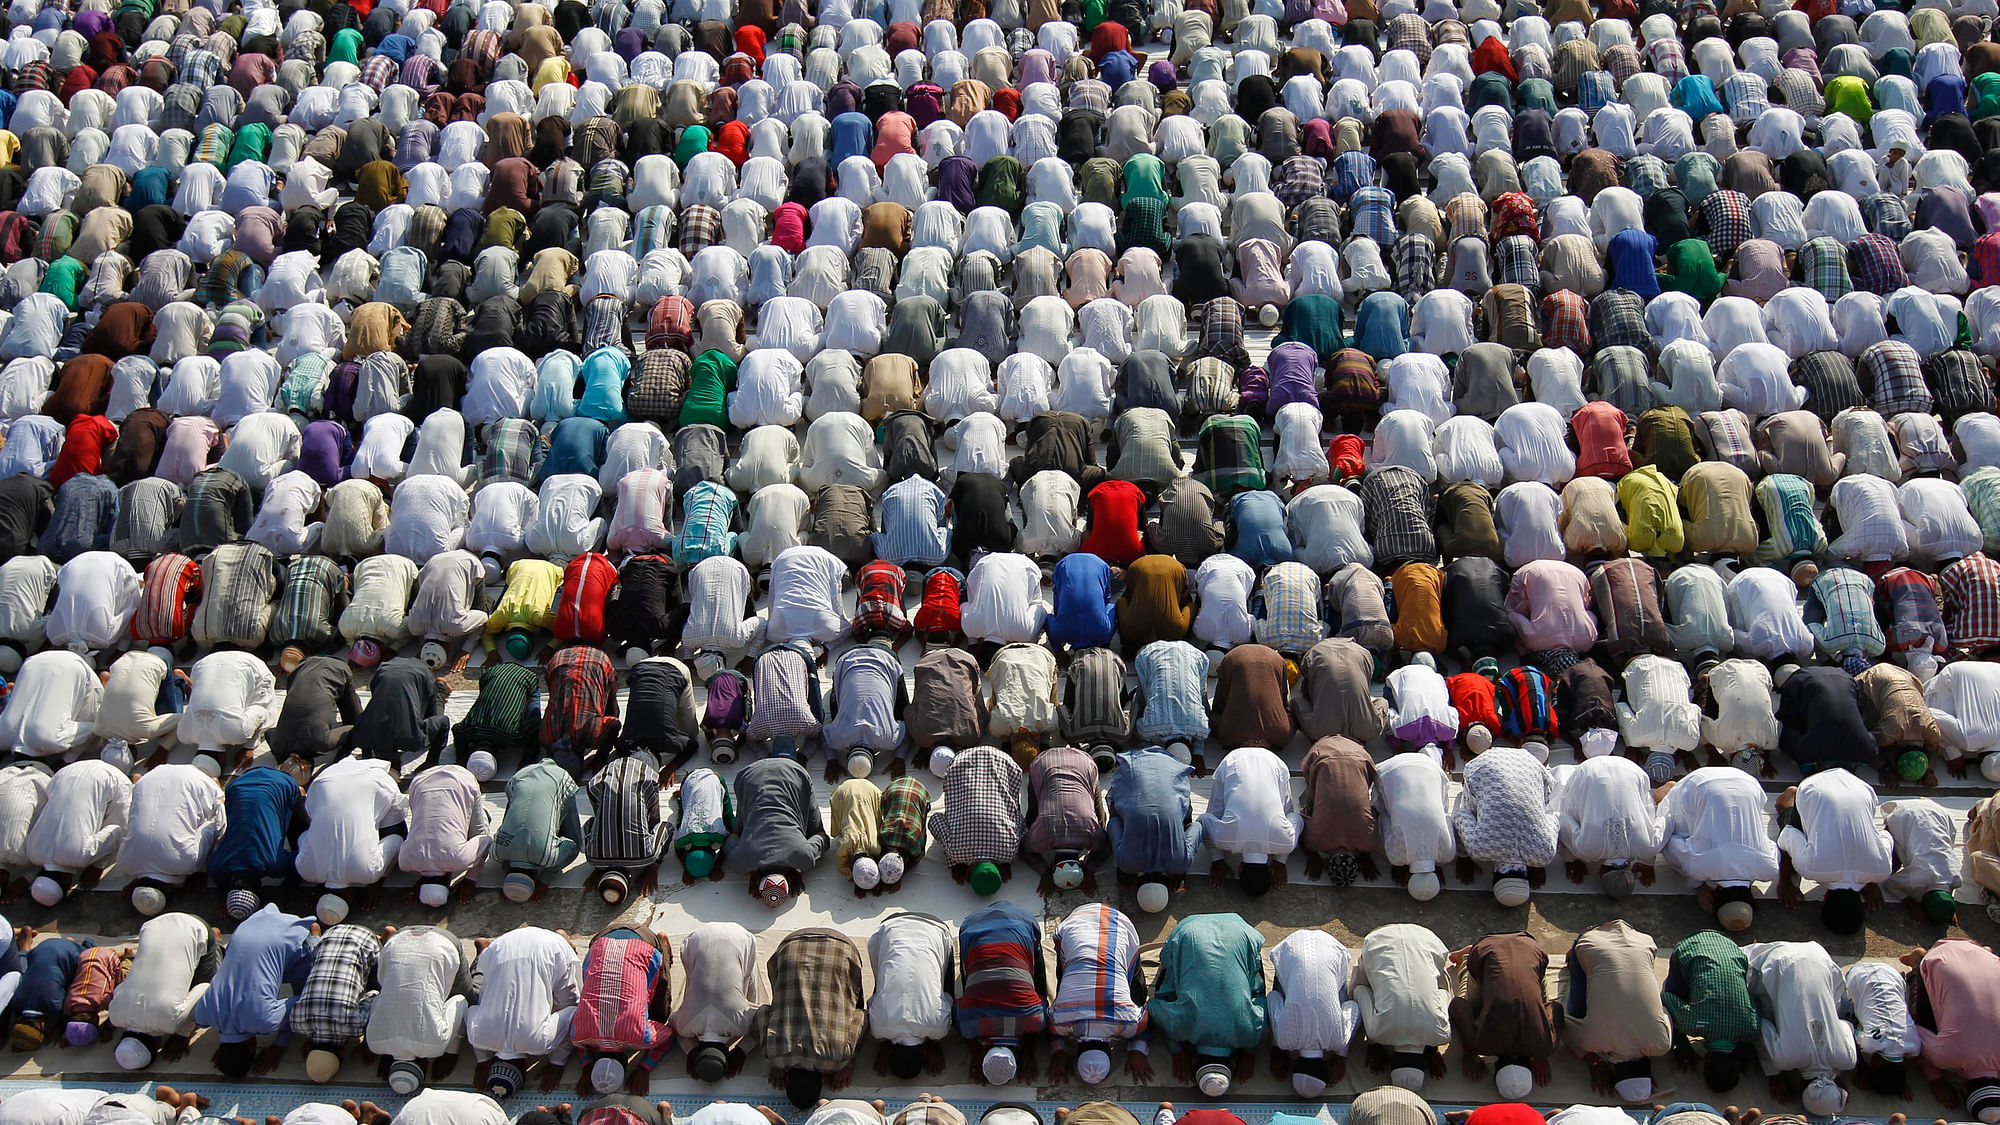 
















Muslims offer prayers at a mosque in Ahmedabad. (Photo: Reuters)